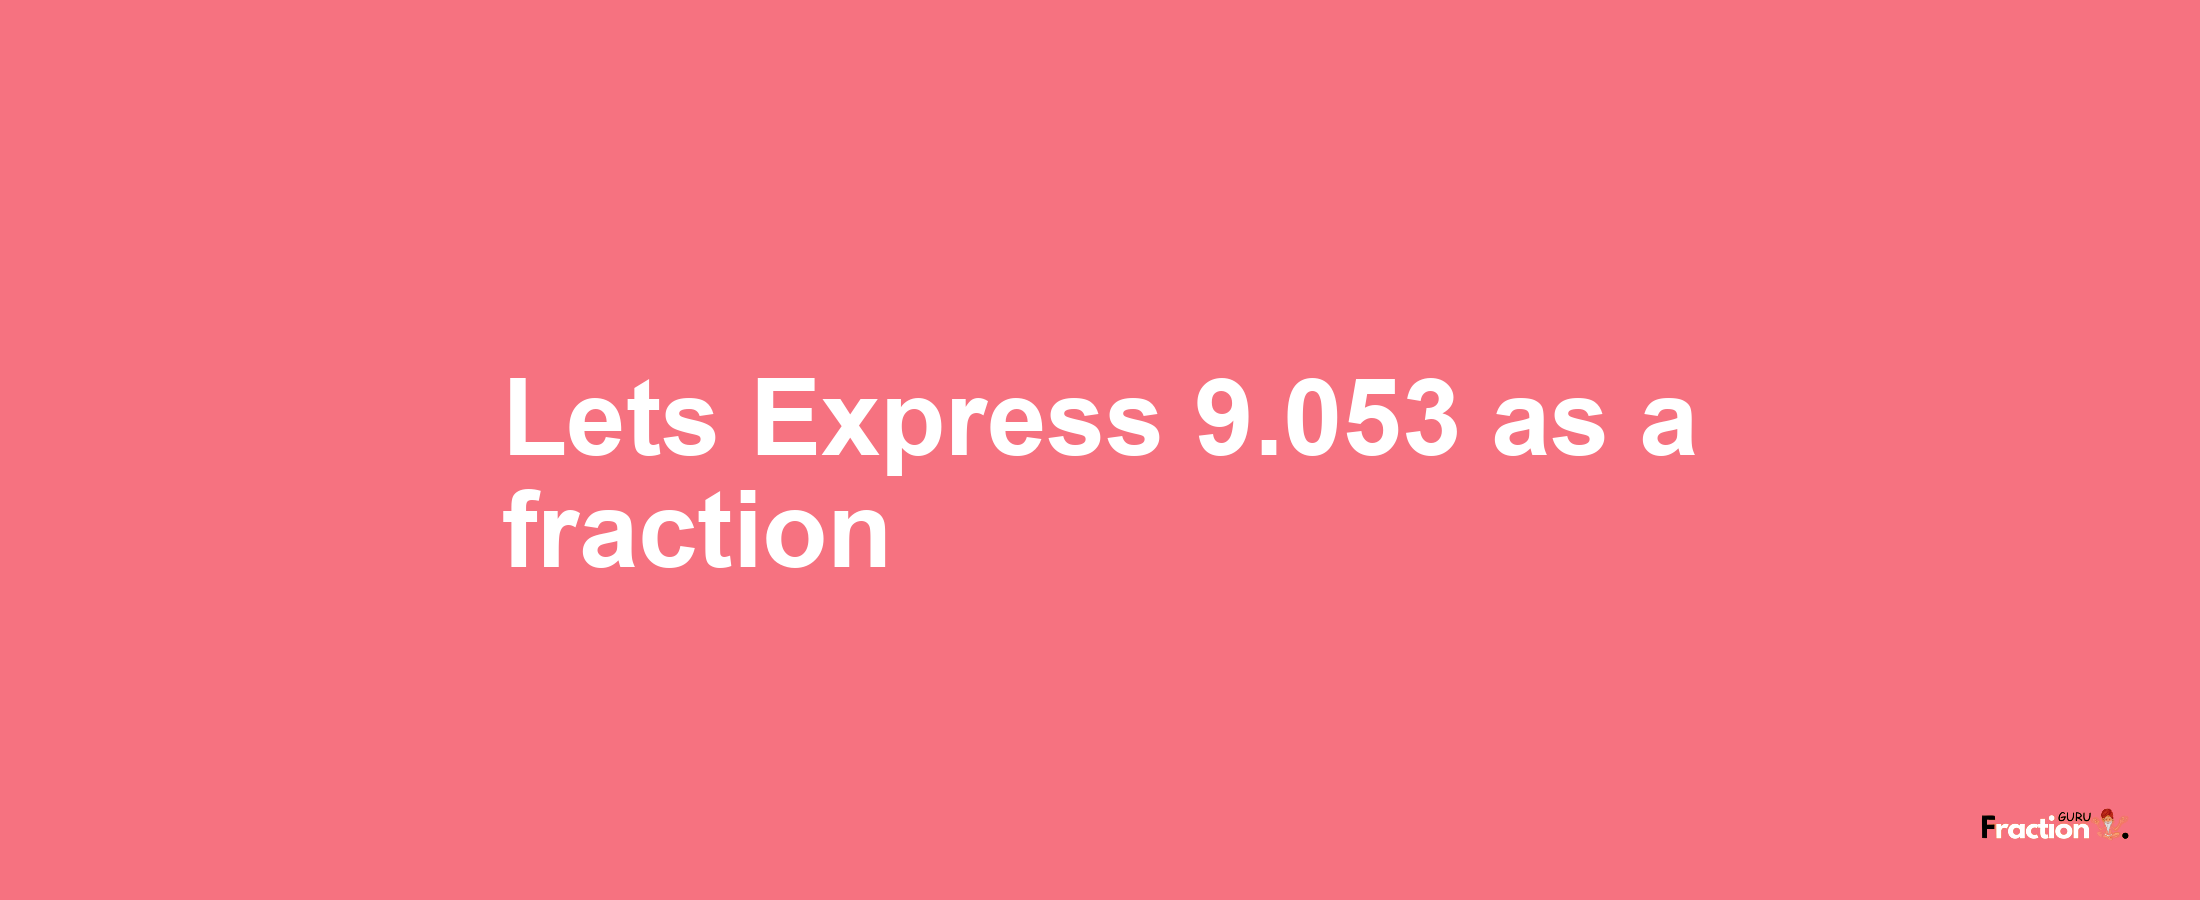 Lets Express 9.053 as afraction